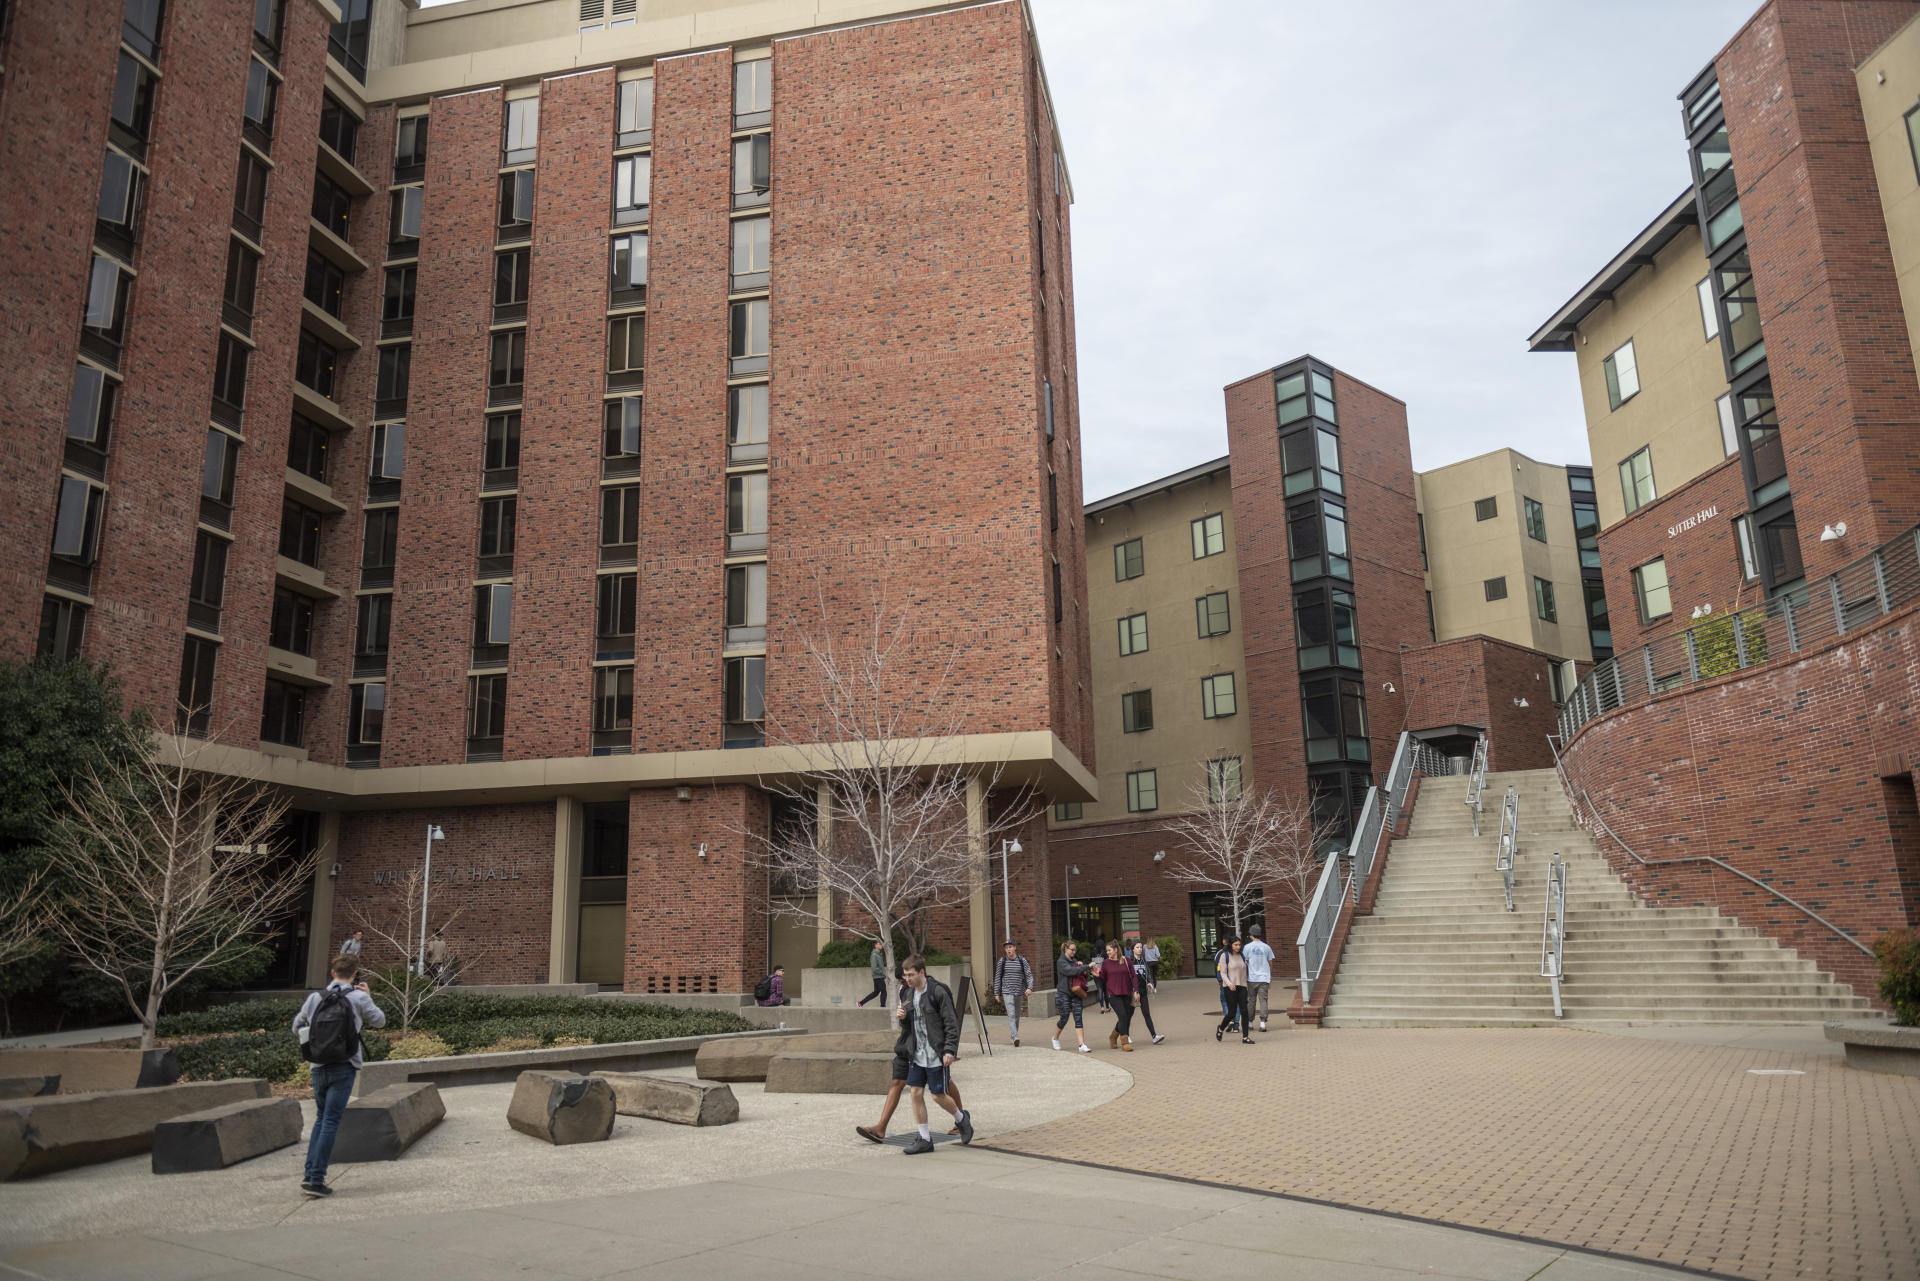 Students walk near the on-campus student housing buildings.